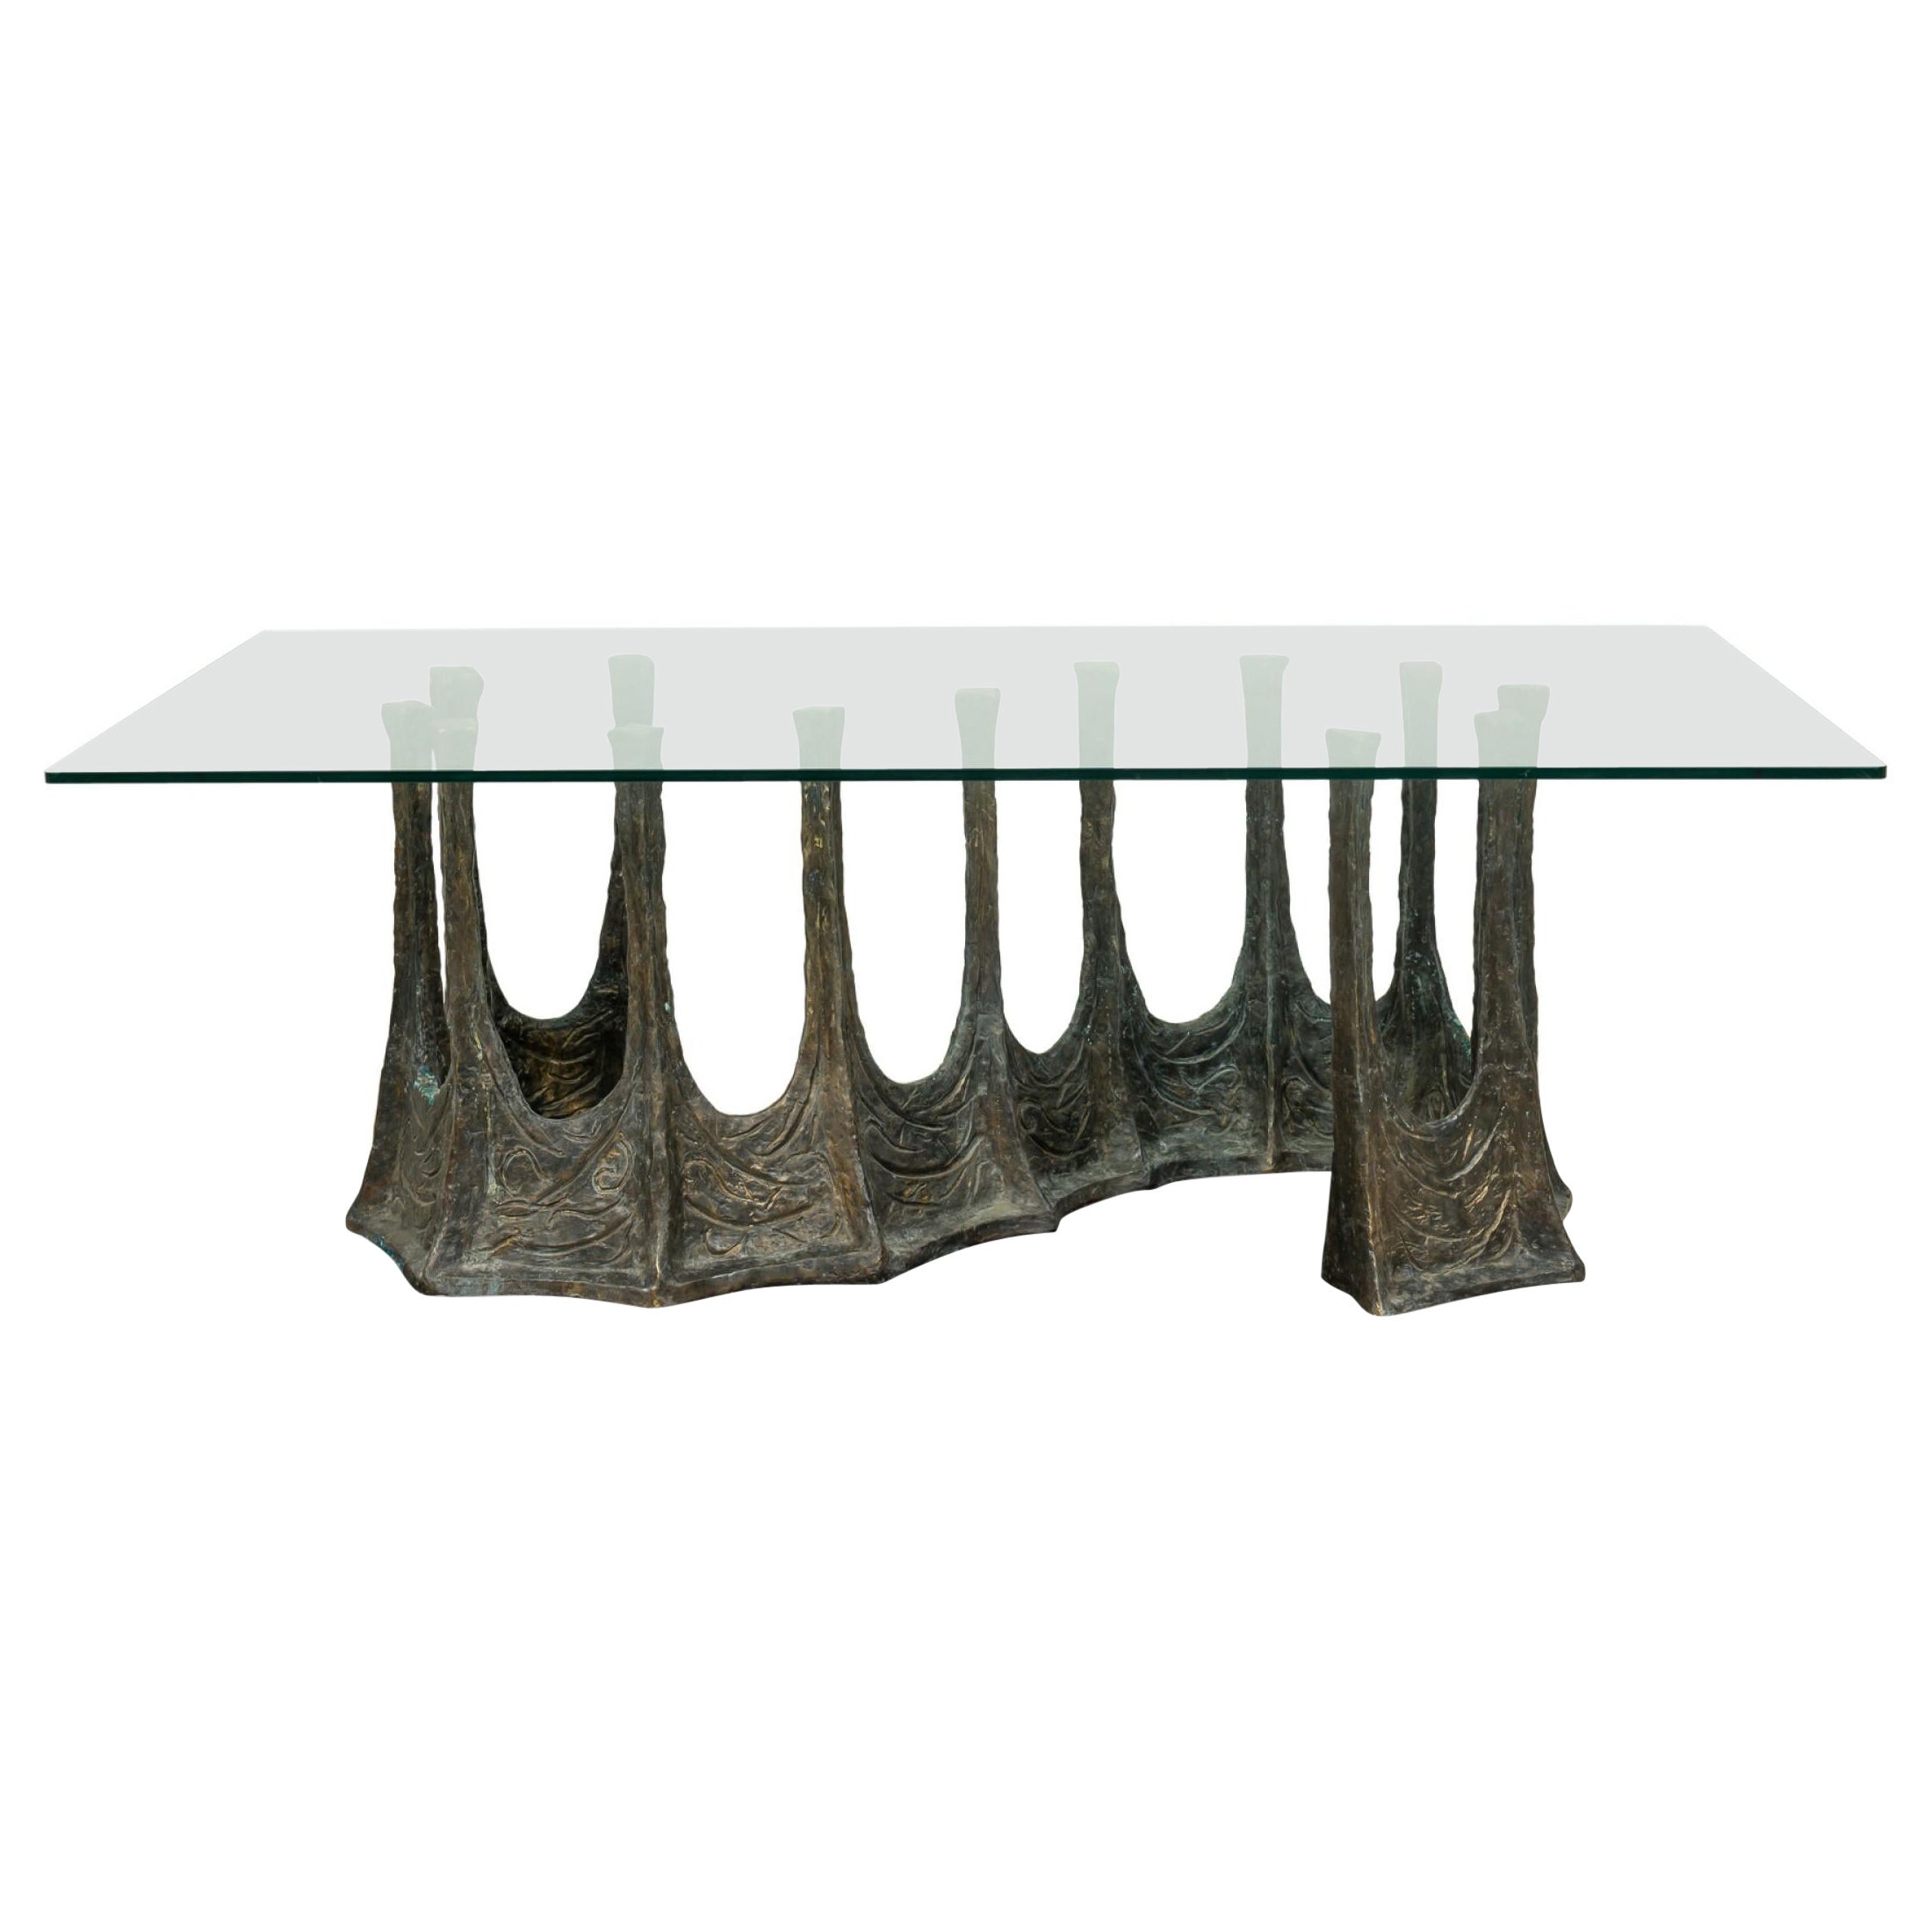 "Guarda" Organic S-Shaped Sculptural Bronze and Glass Dining / Conference Table